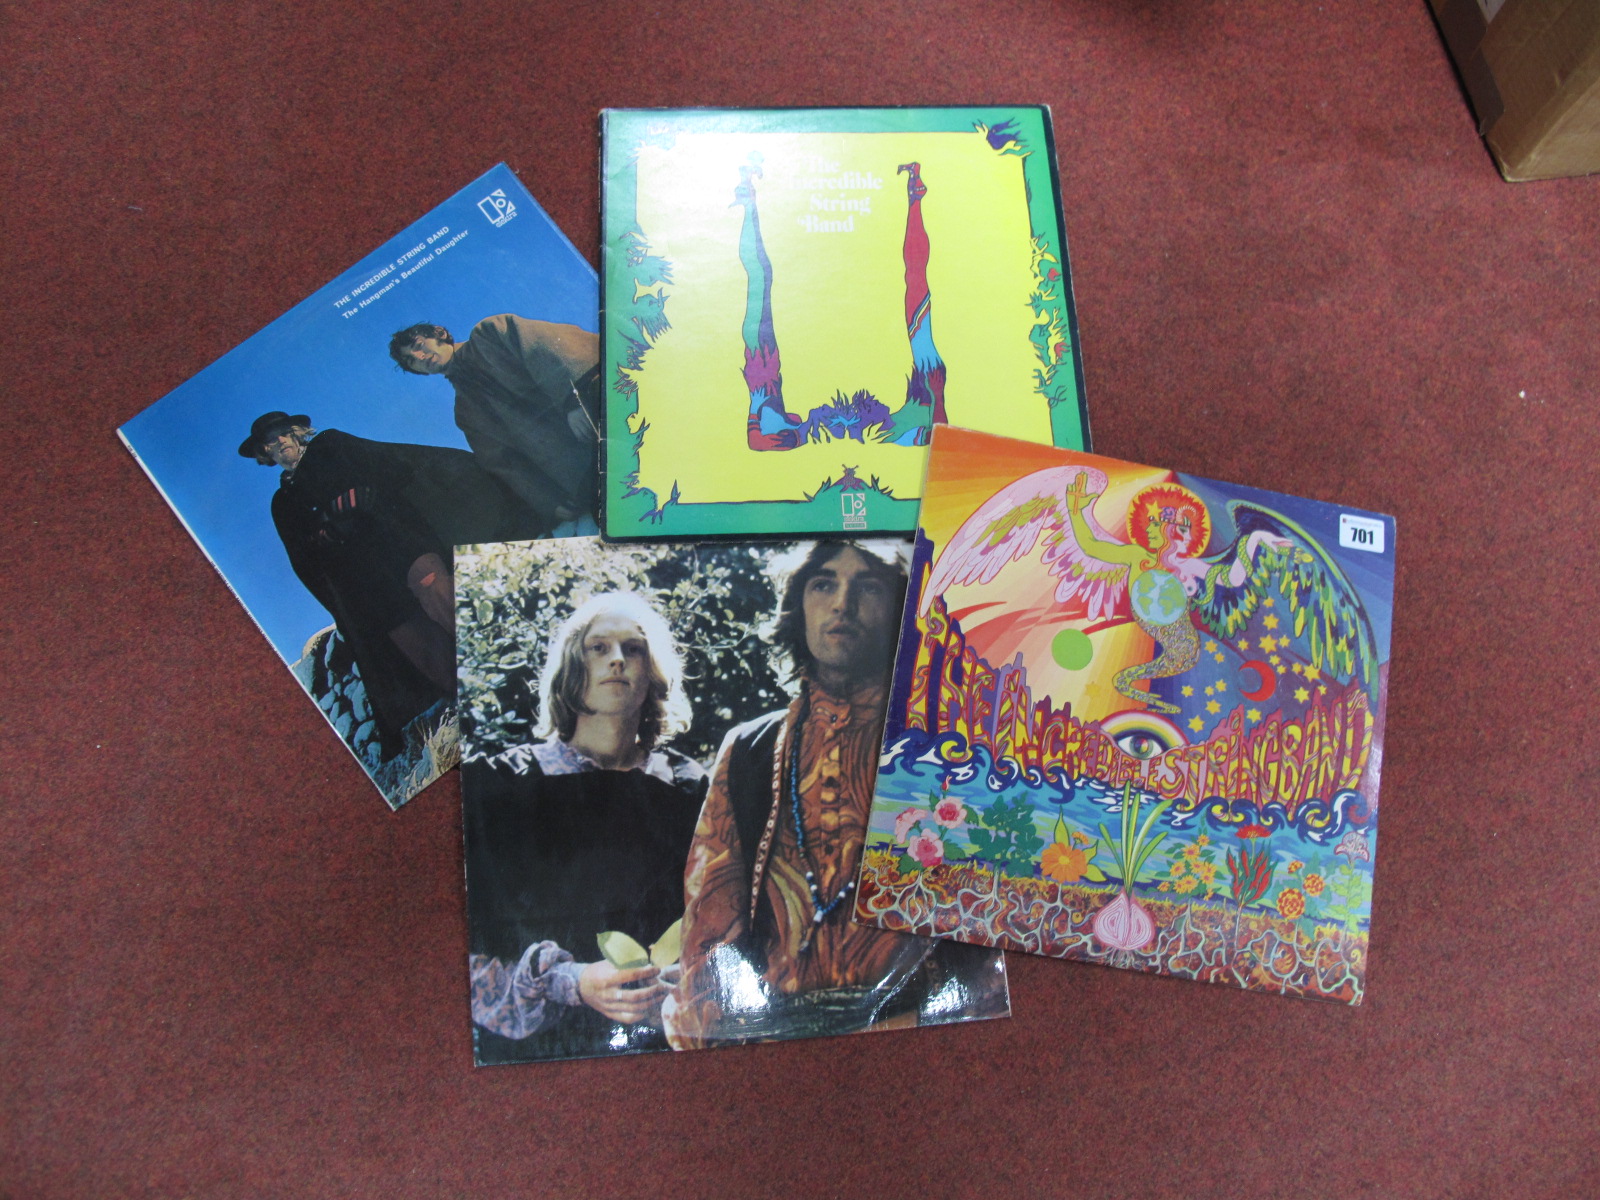 Incredible String Band - four L.P's to include 'The 5000 Spirits or the Layers of The Onion' (